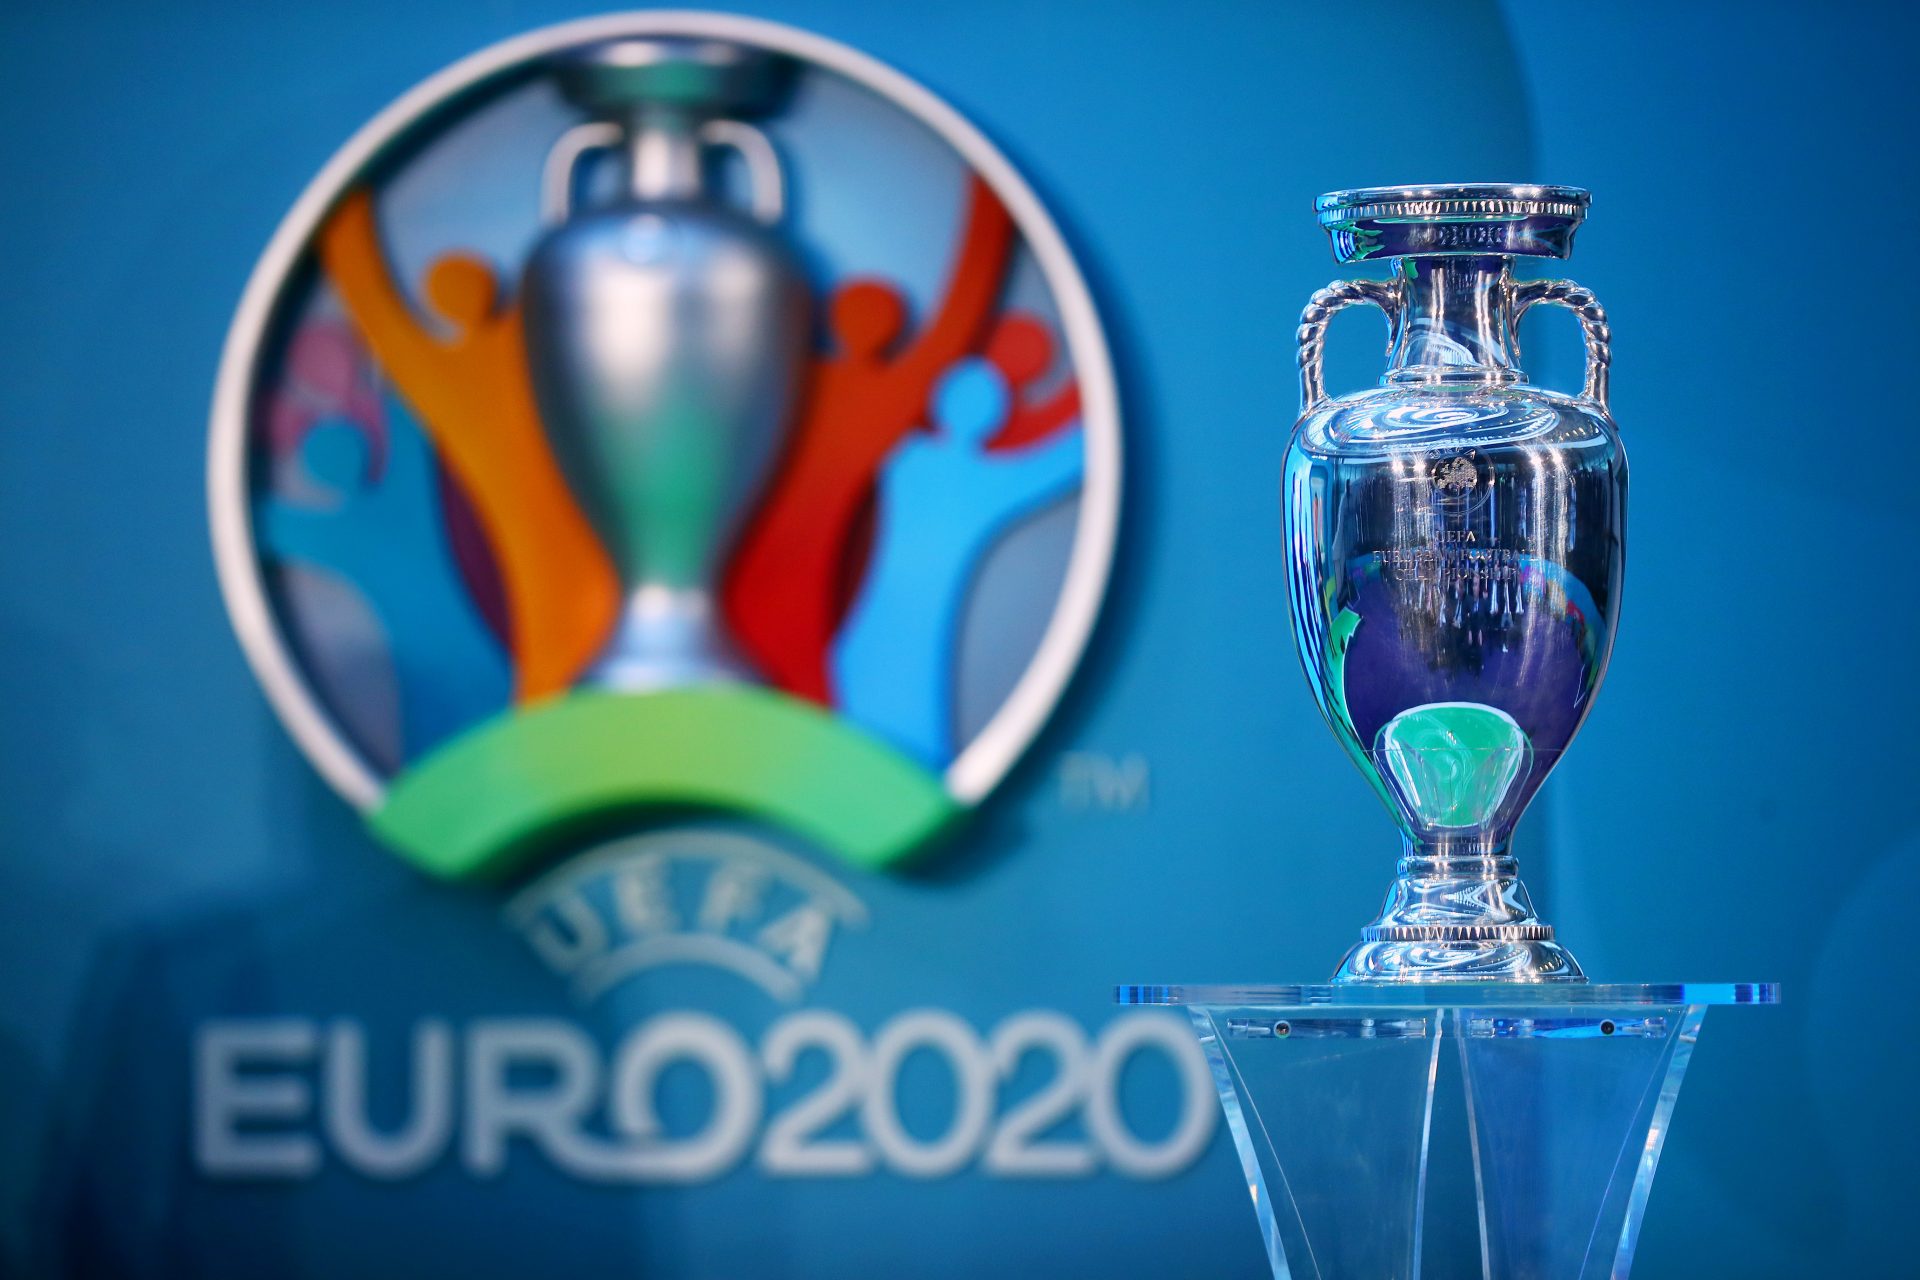 Euro 2028: Automatic qualification in doubt for UK and Ireland despite hosting